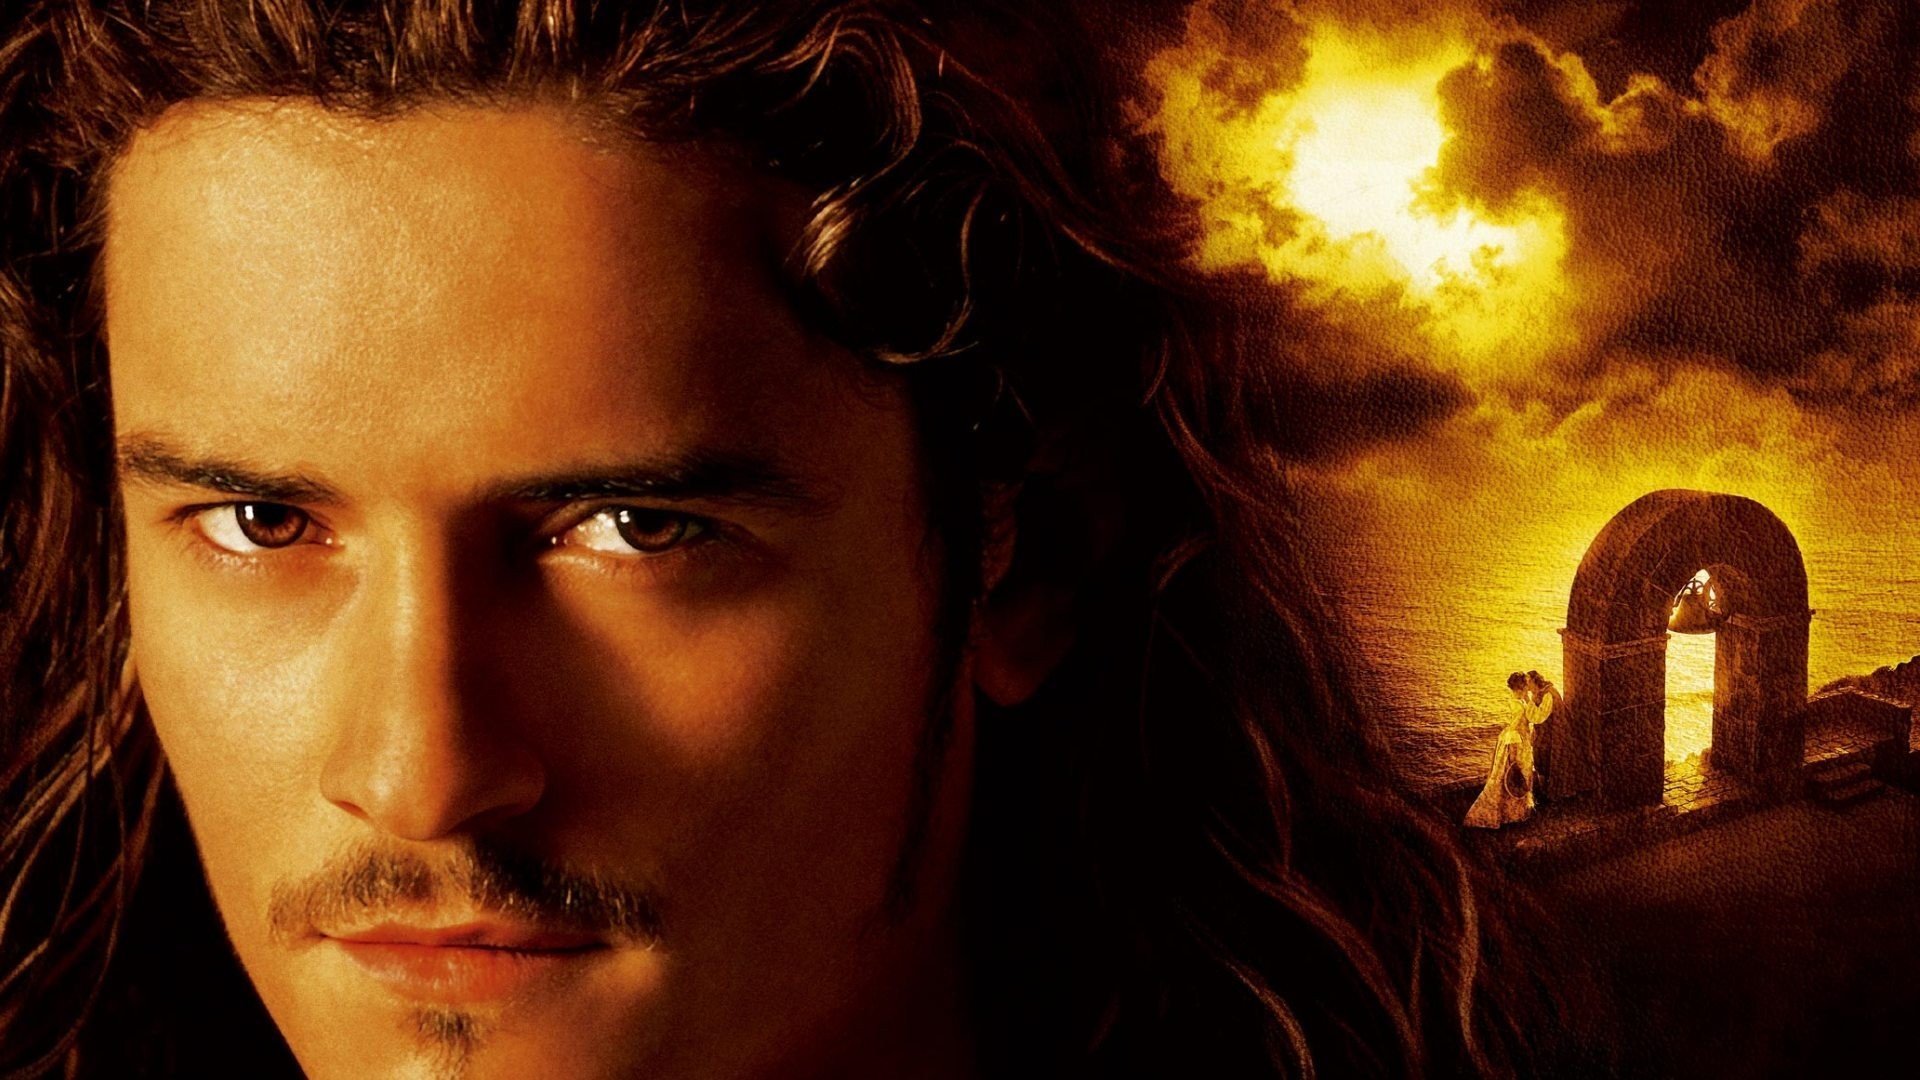 Best Pirates Of The Caribbean - Orlando Bloom Pirates Of The Caribbean  Black Pearl - 1920x1080 Wallpaper 